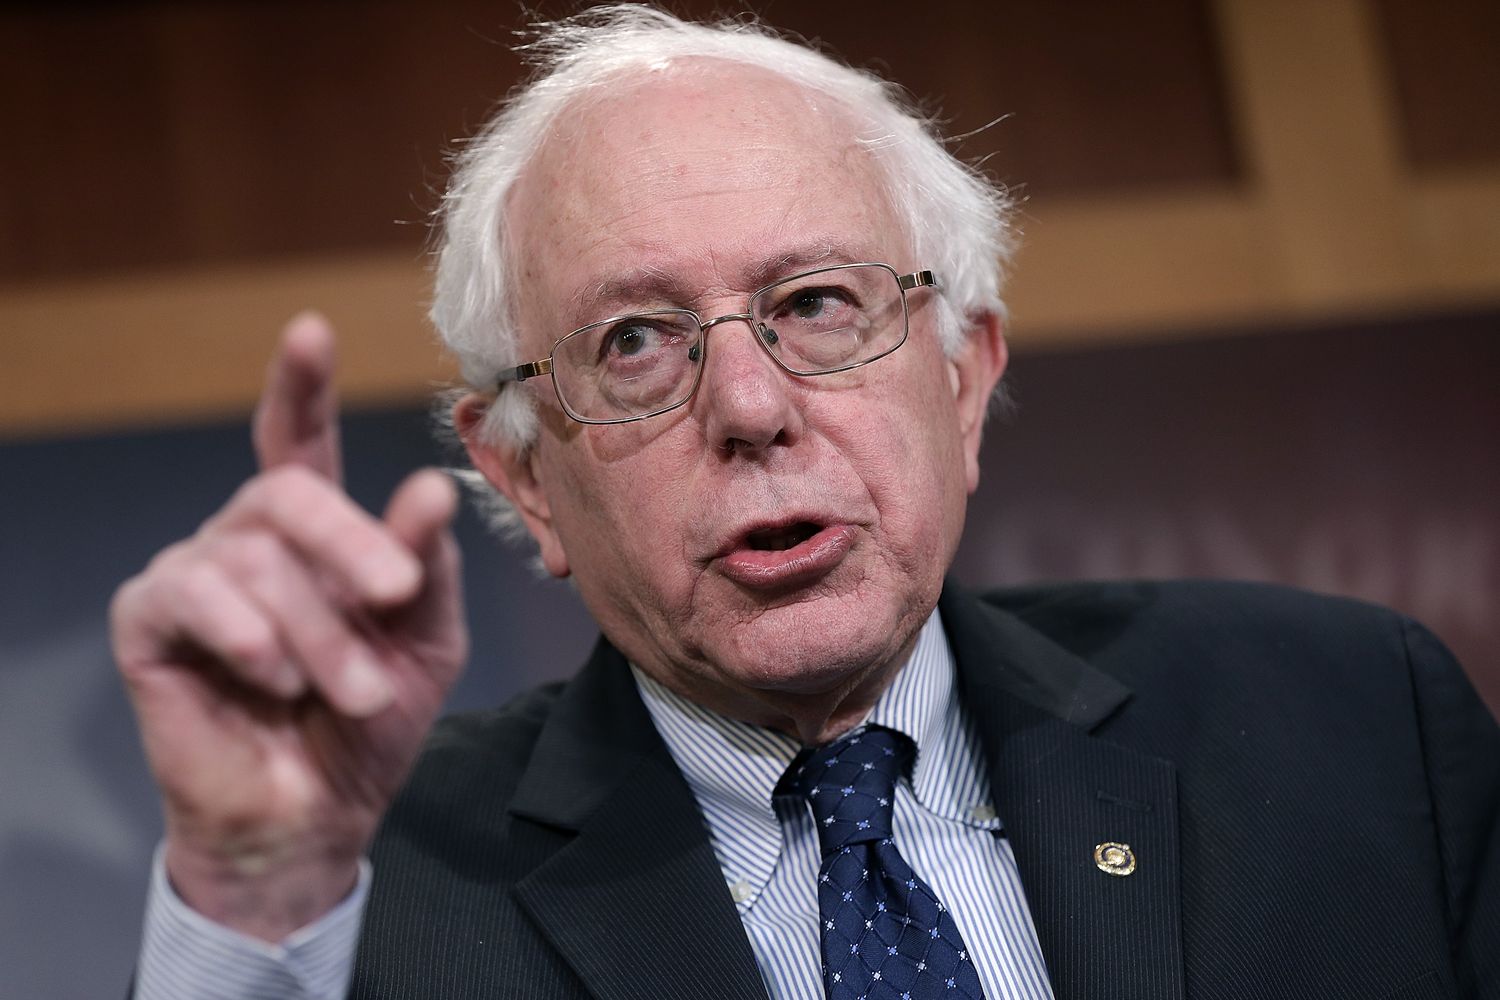 Sanders won’t back infrastructure deal with more gas taxes, electric vehicle fees